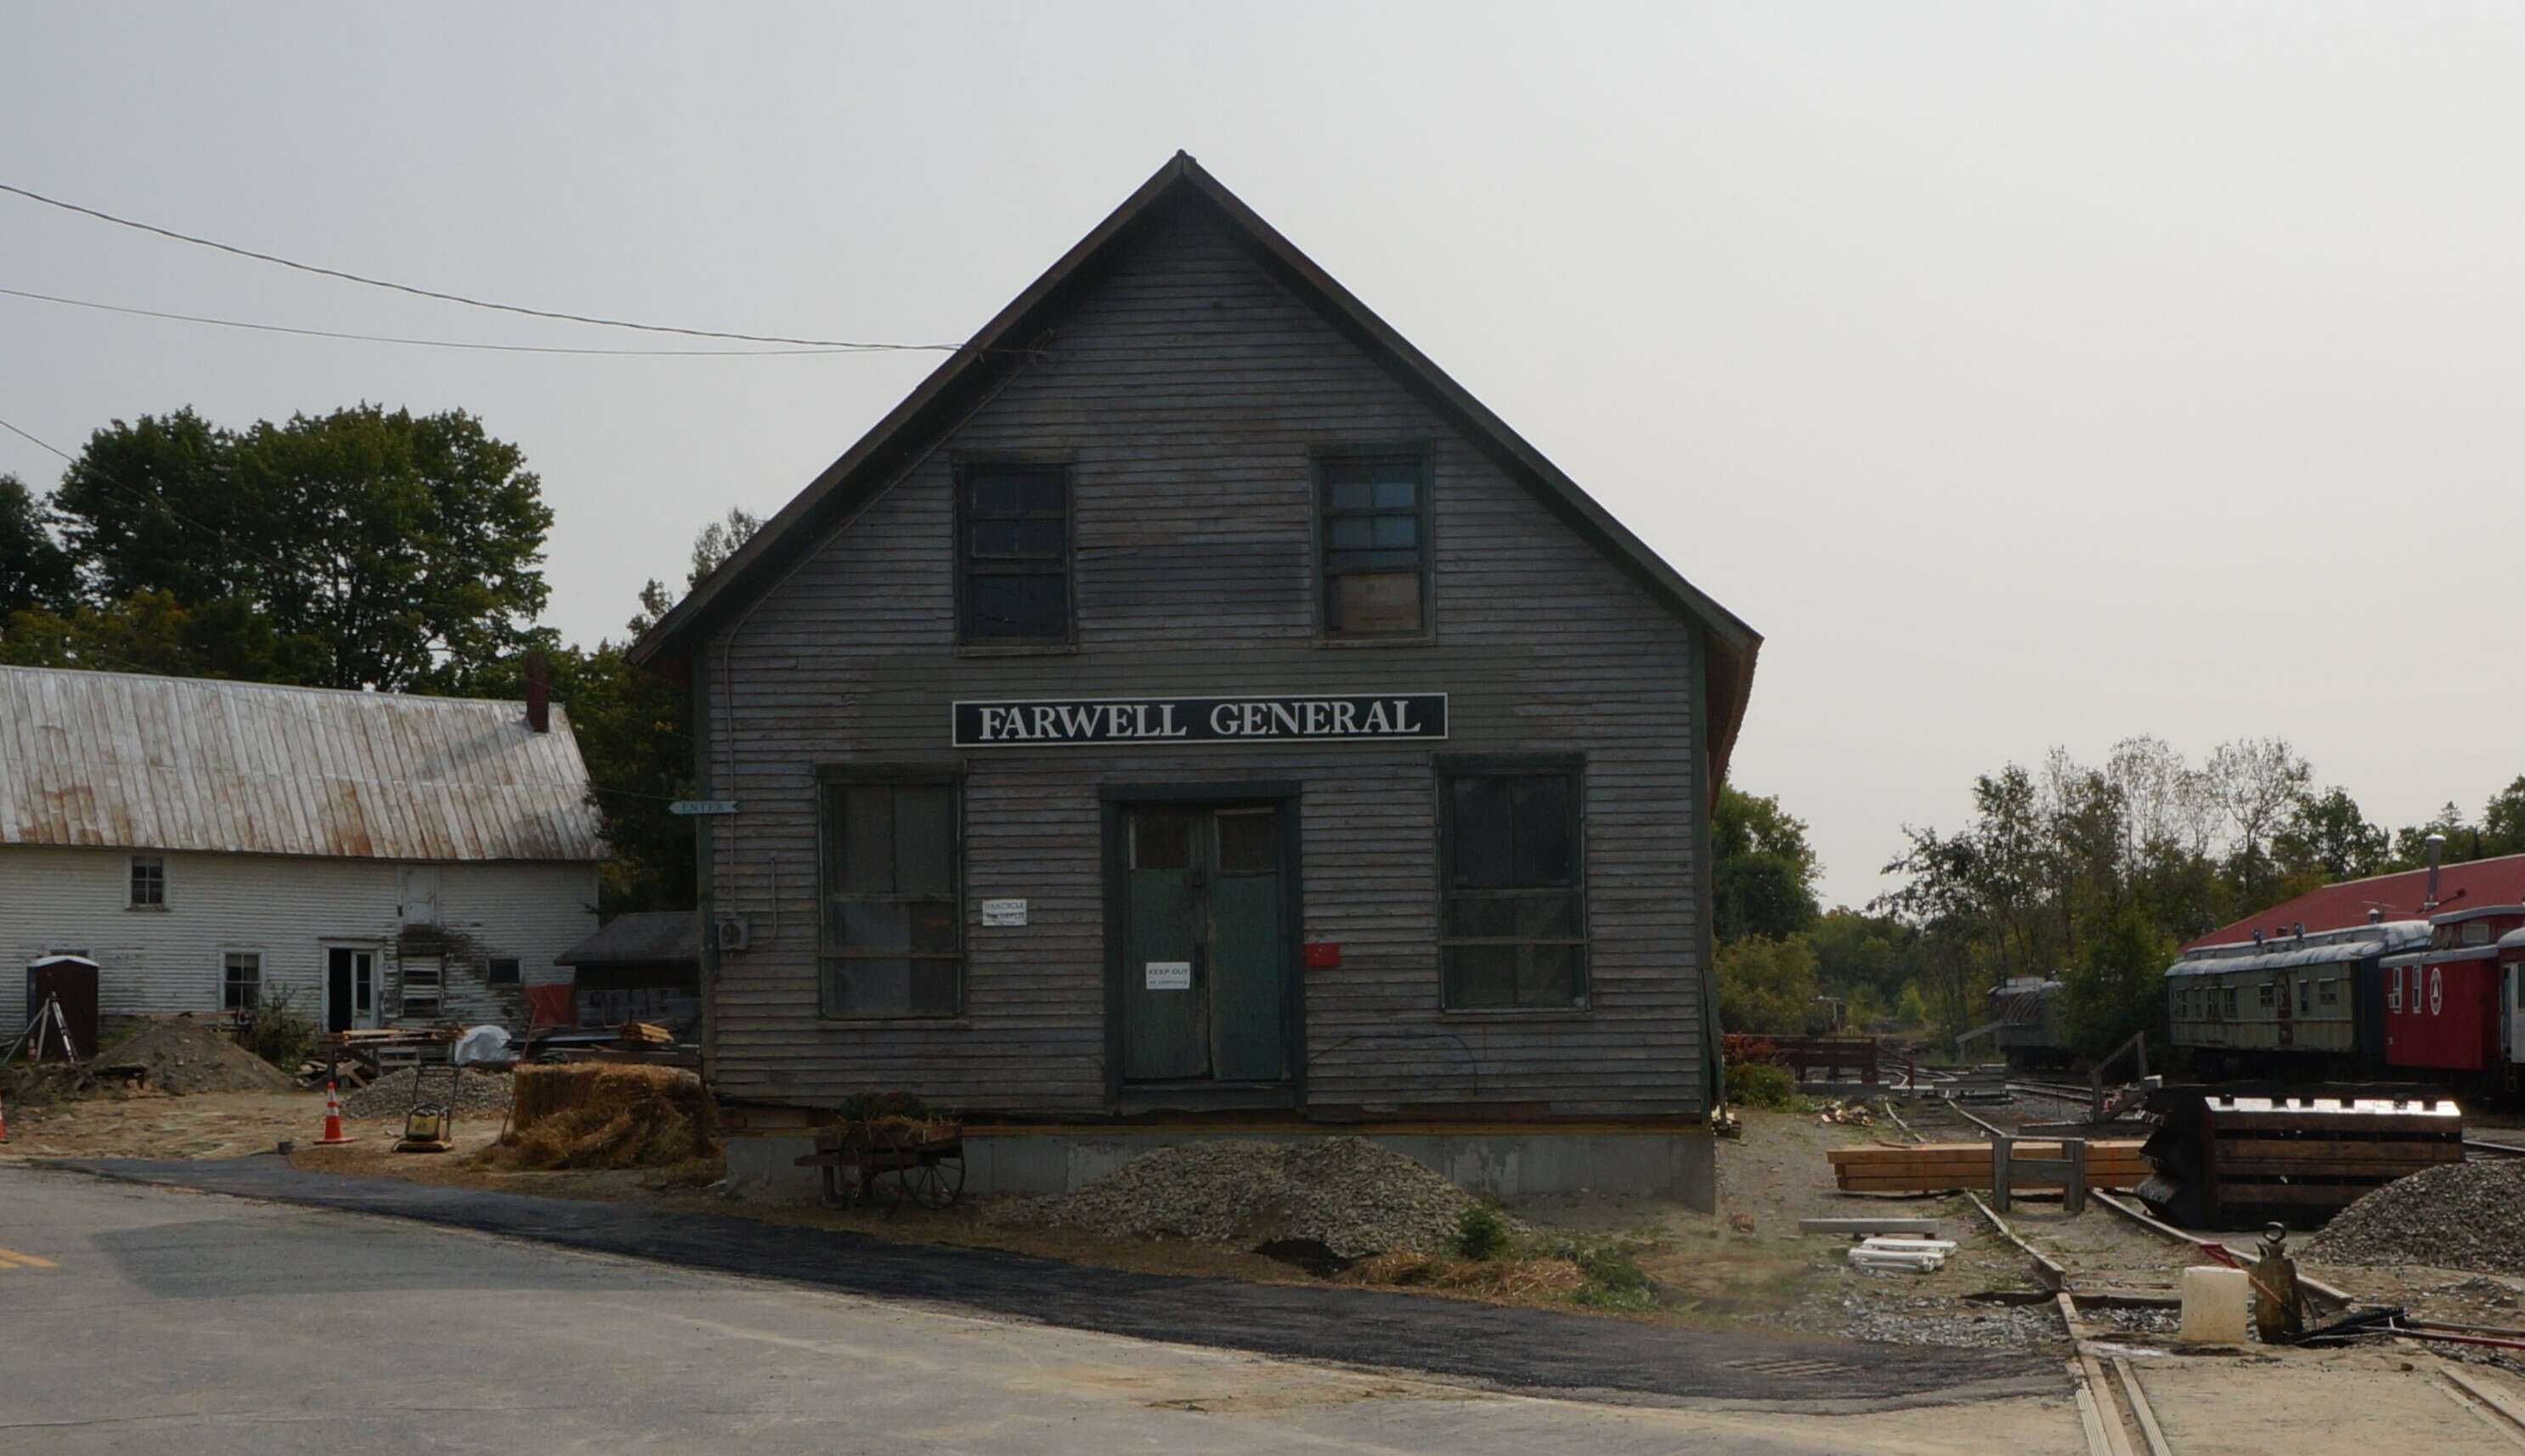 An old unpainted wooden building that says Farwell General on a sign above the door; to the left is an old white buiding with peeling paint and to the right railroad tracks with some box cars.